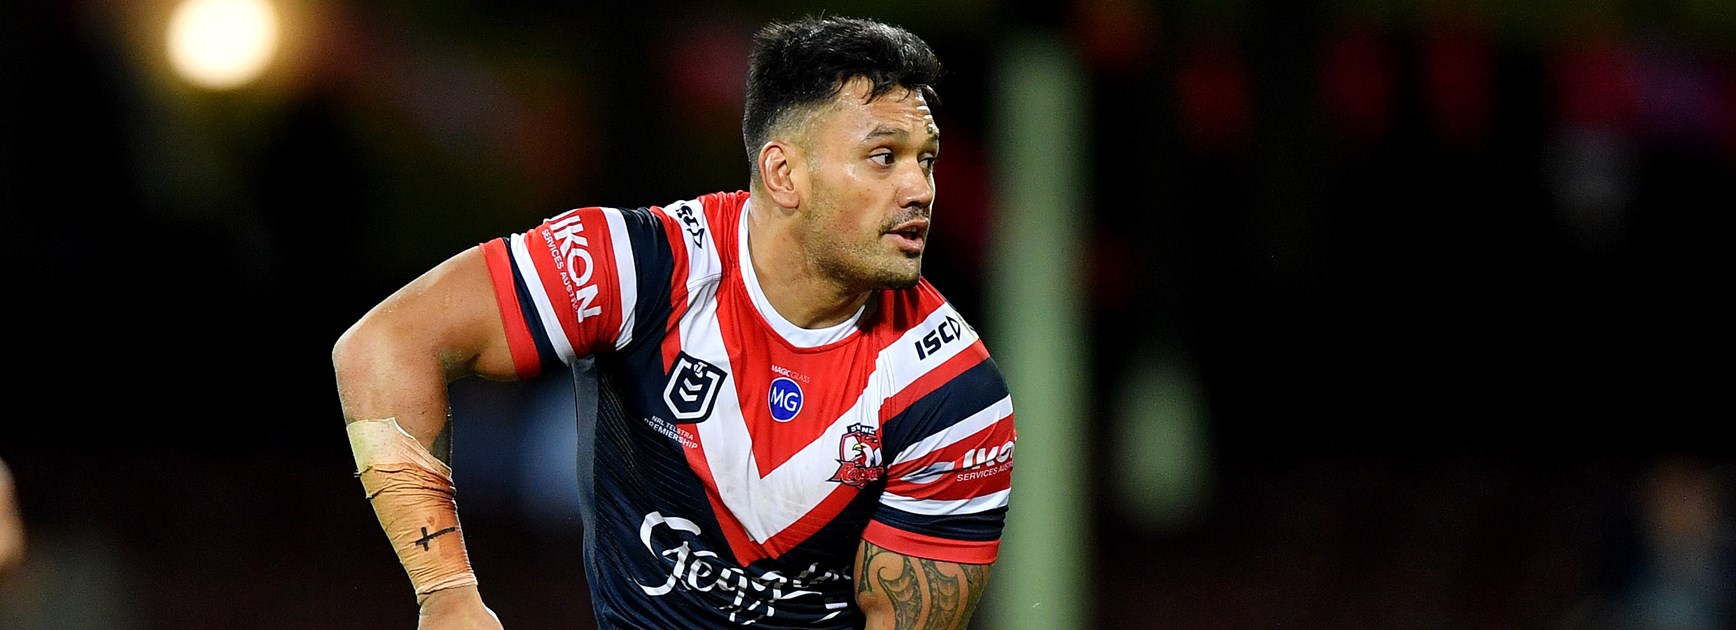 New Roosters deal looms for Kiwi rookie after injury 'torture'